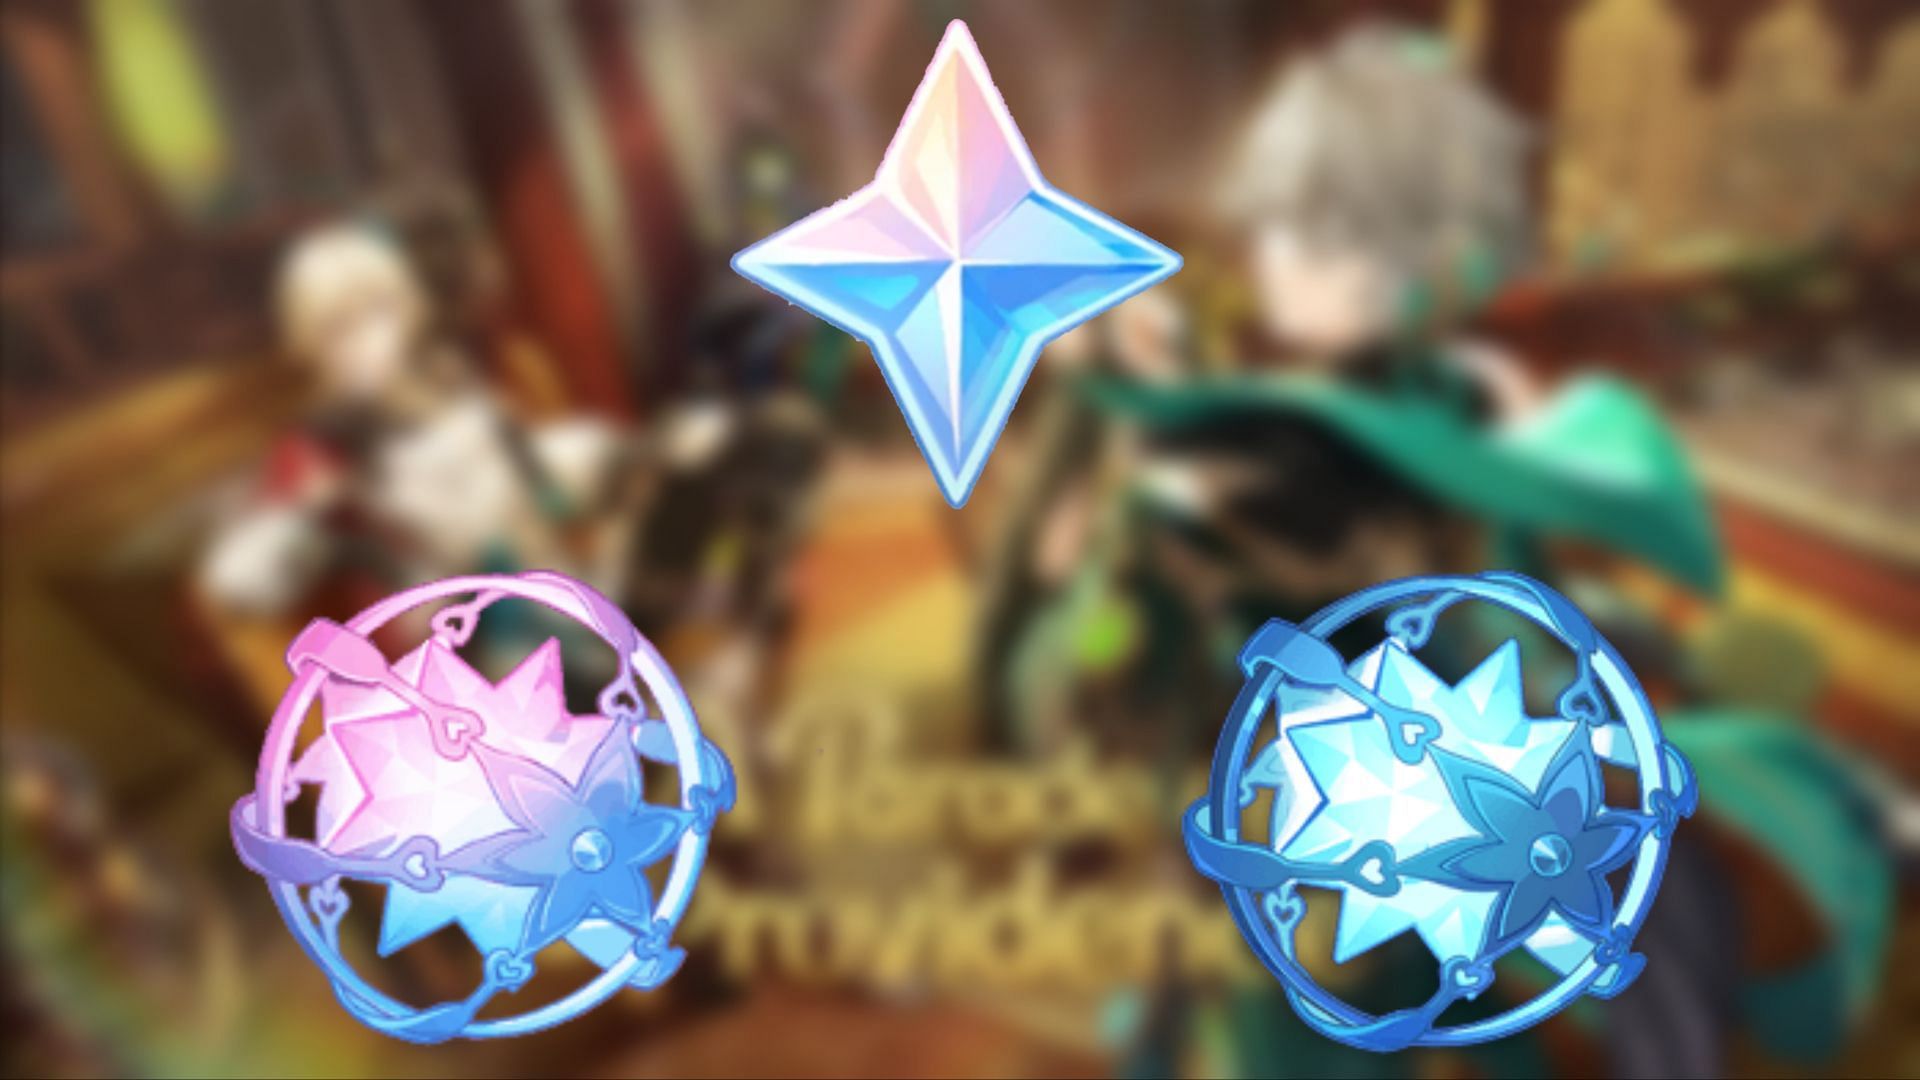 HoYoLAB x Prime Gaming Event: Baizhu and Ganyu Are Here - Take Part in the  Topic Event to Win Primogems, Genshin Impact Wiki